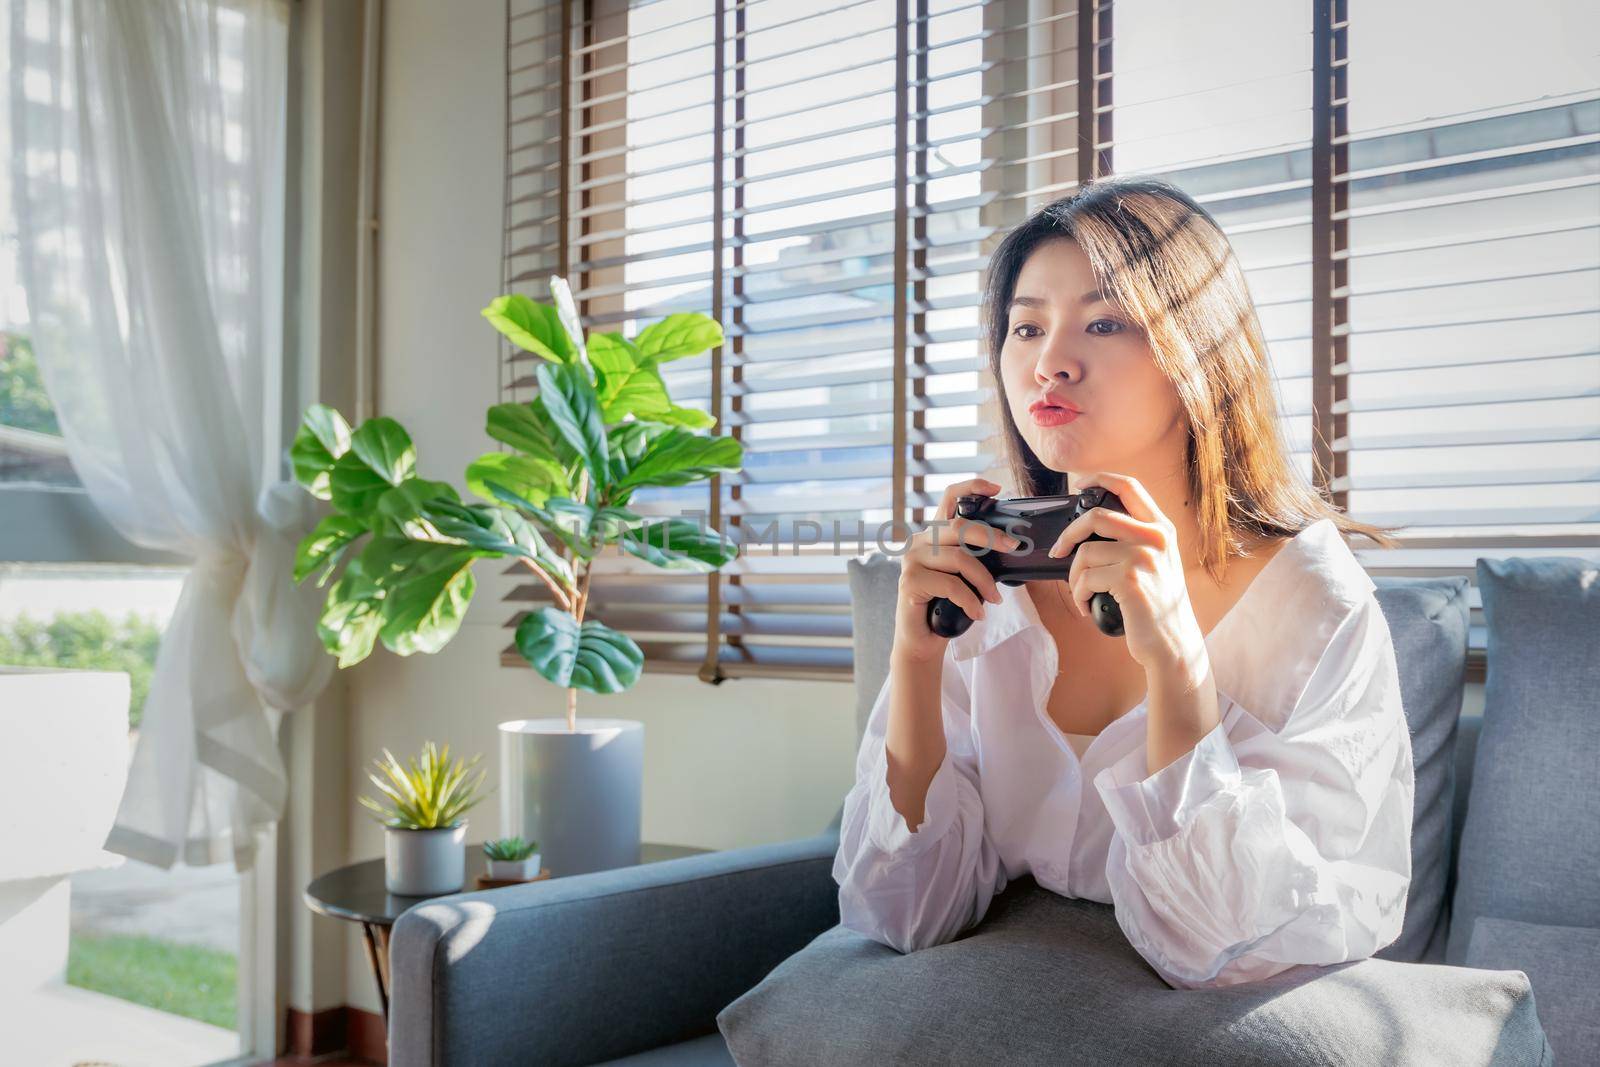 Asian women work from home by casting game streaming online via console game during corona virus or covid19 crisis follow the Social Distancing regulation.